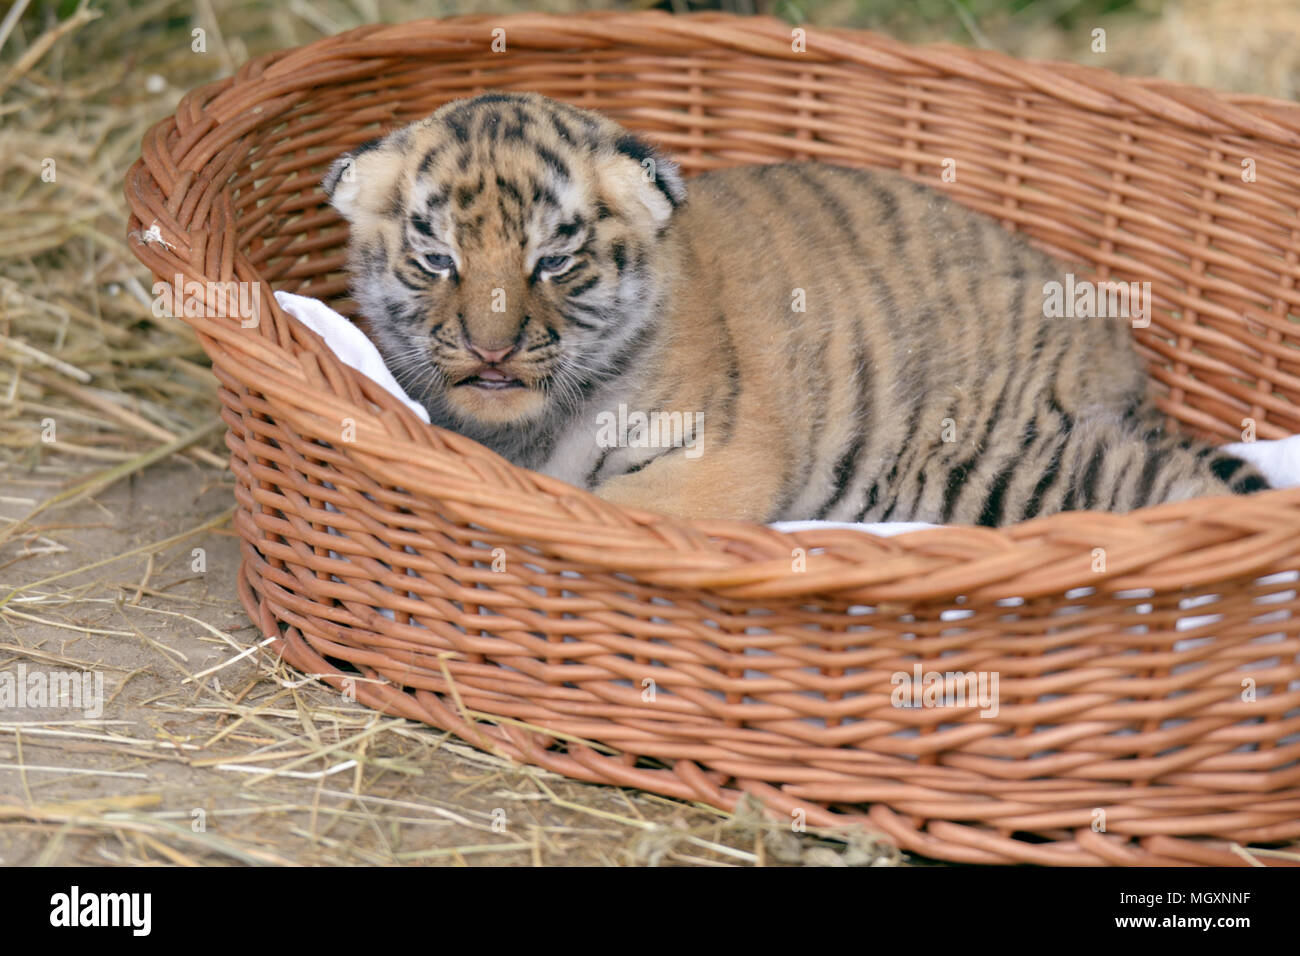 Tiger cub in a basket Stock Photo - Alamy